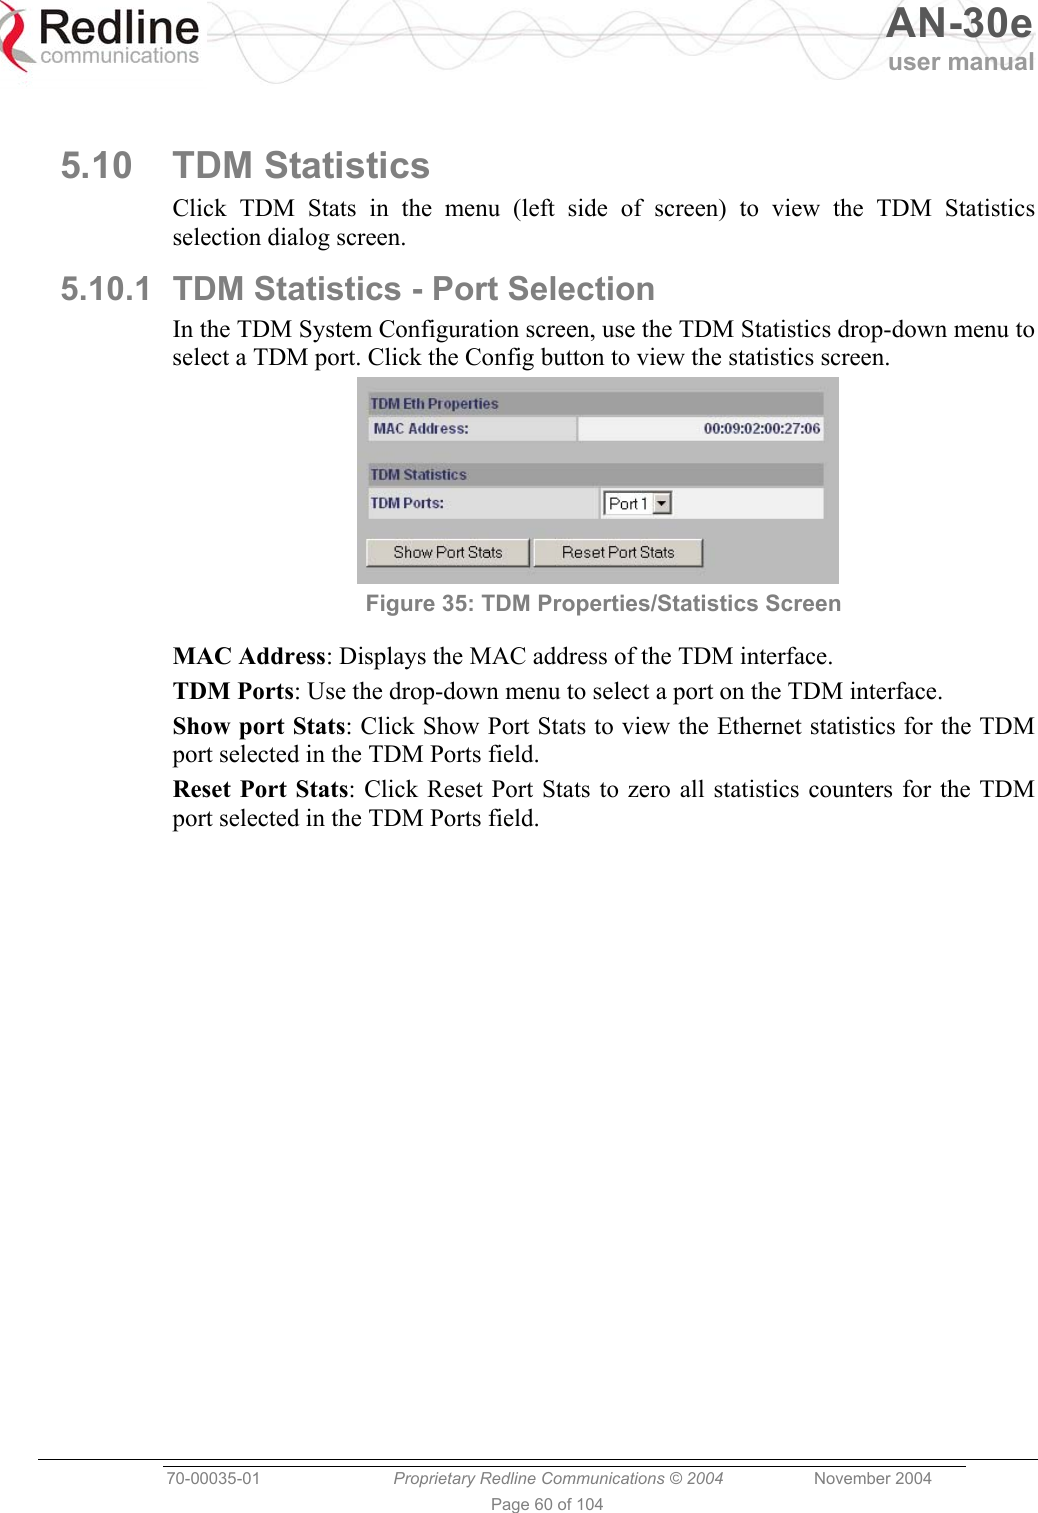   AN-30e user manual  70-00035-01  Proprietary Redline Communications © 2004 November 2004   Page 60 of 104  5.10 TDM Statistics Click TDM Stats in the menu (left side of screen) to view the TDM Statistics selection dialog screen. 5.10.1  TDM Statistics - Port Selection In the TDM System Configuration screen, use the TDM Statistics drop-down menu to select a TDM port. Click the Config button to view the statistics screen.  Figure 35: TDM Properties/Statistics Screen MAC Address: Displays the MAC address of the TDM interface. TDM Ports: Use the drop-down menu to select a port on the TDM interface. Show port Stats: Click Show Port Stats to view the Ethernet statistics for the TDM port selected in the TDM Ports field. Reset Port Stats: Click Reset Port Stats to zero all statistics counters for the TDM port selected in the TDM Ports field. 